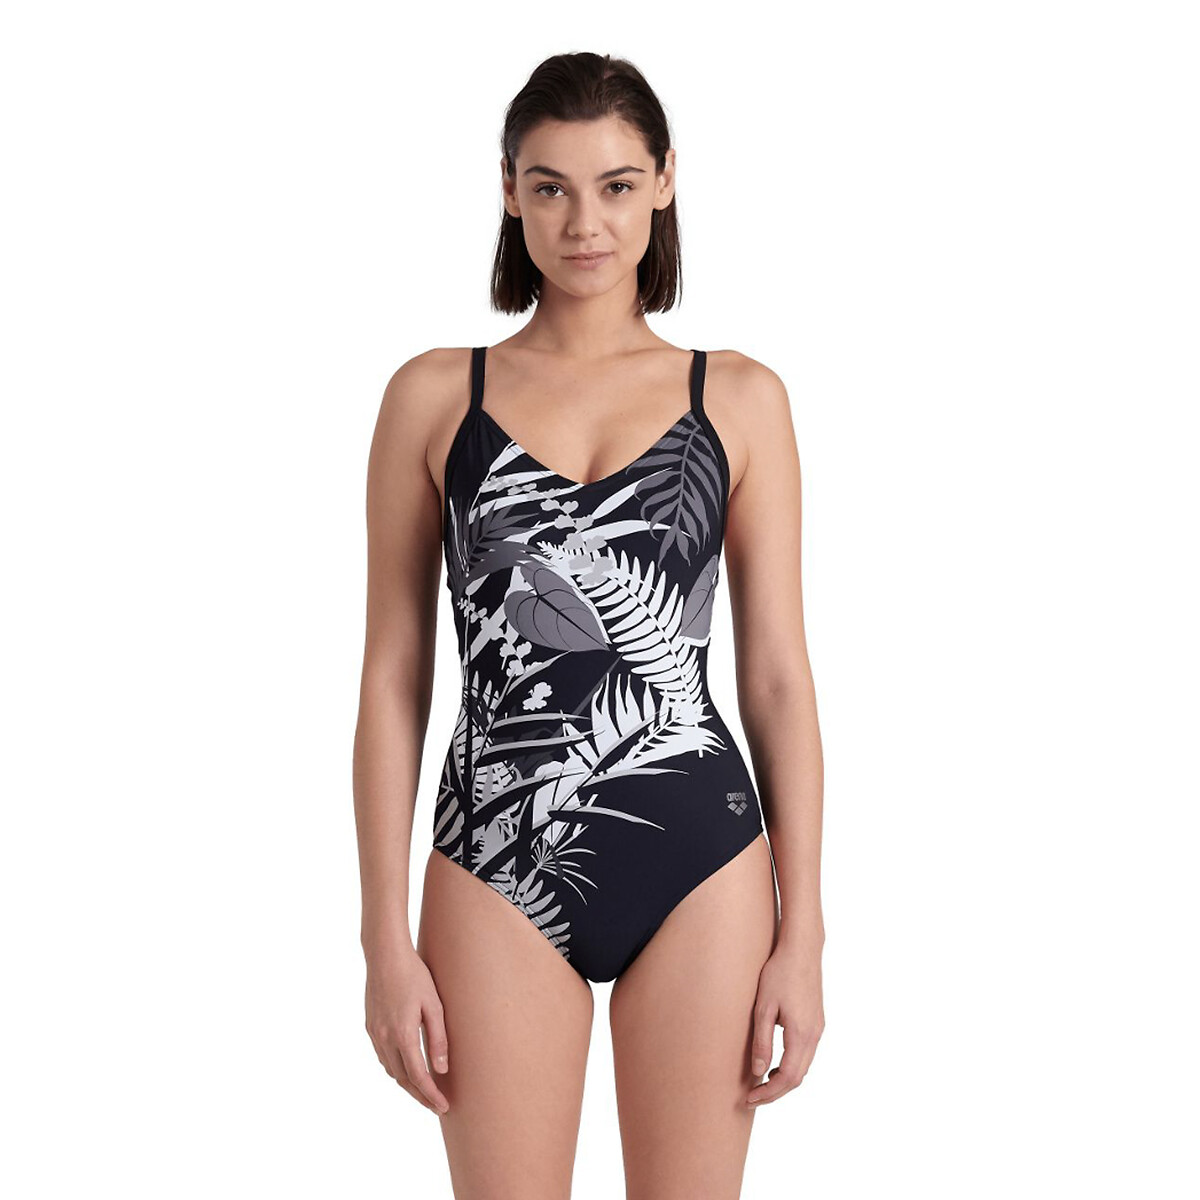 Lucy Pool Recycled Swimsuit